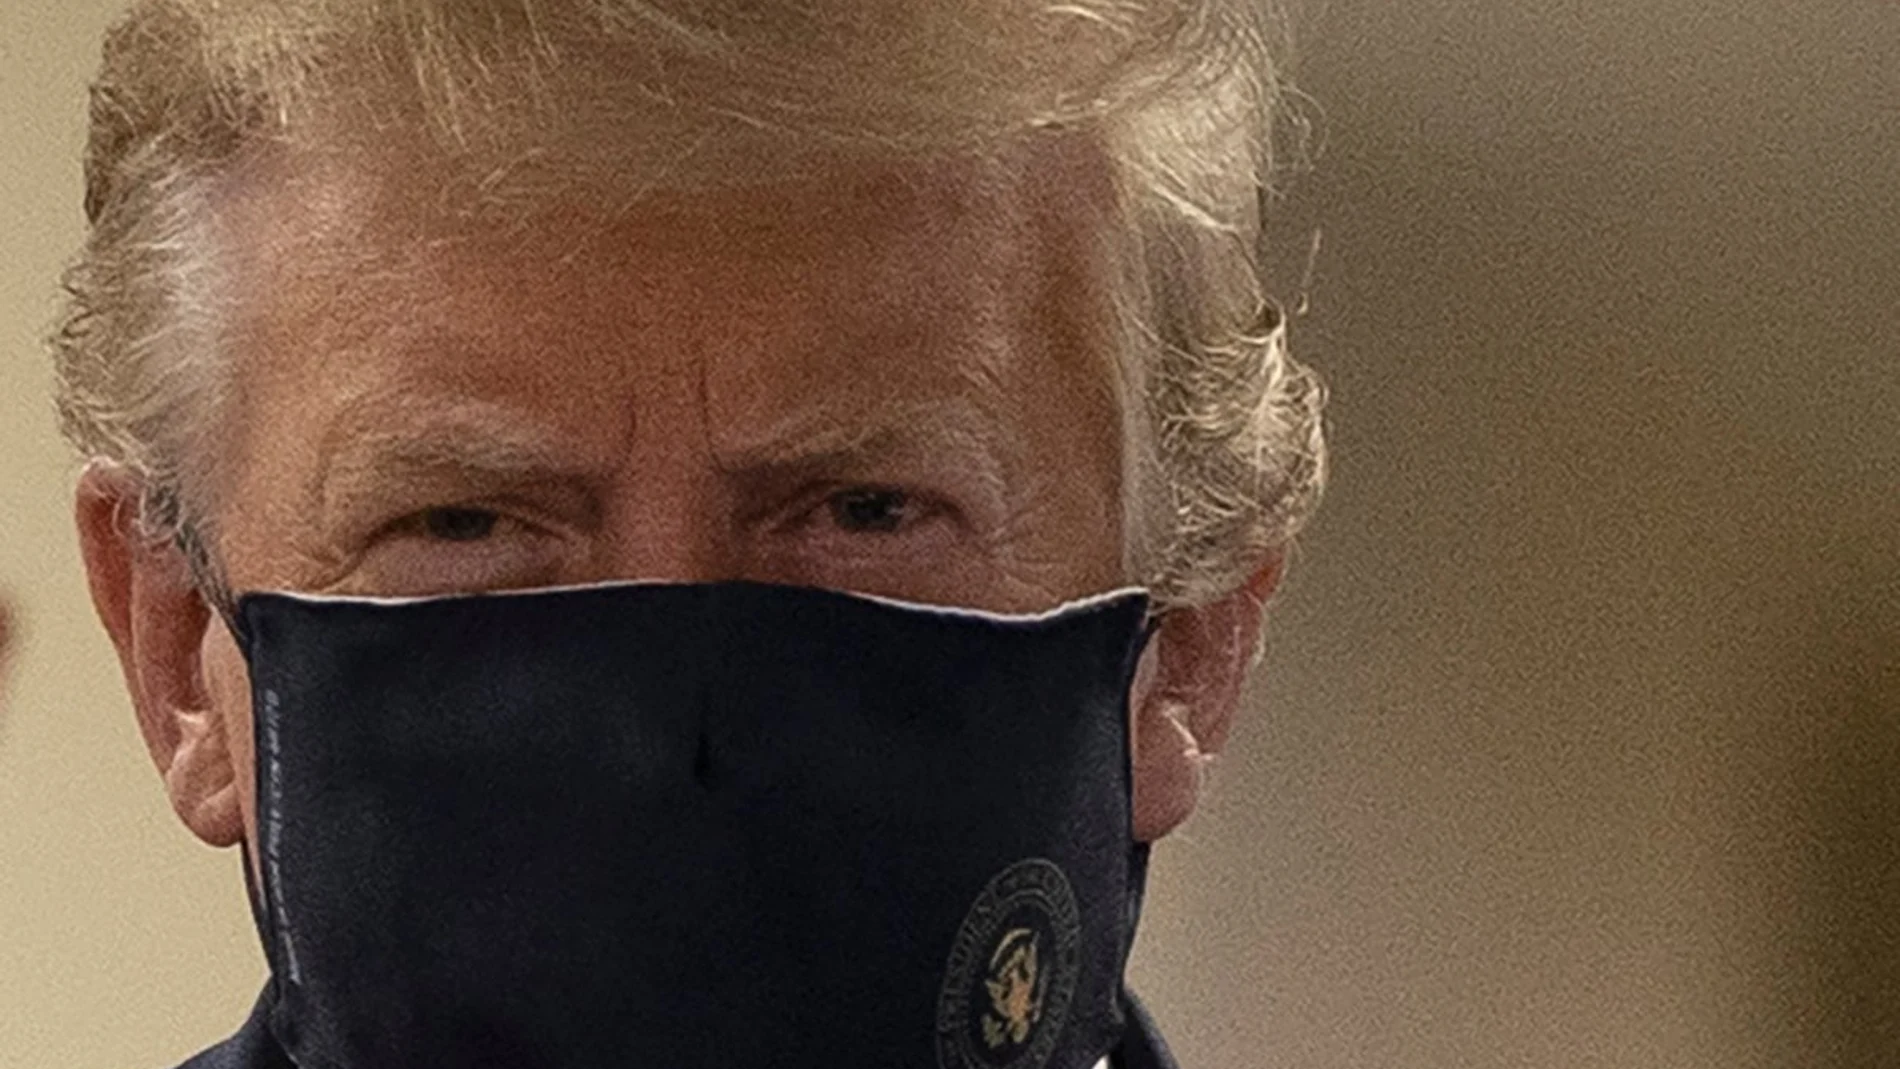 U.S. President Donald Trump wears a mask while visiting Walter Reed National Military Medical Center in Bethesda, Maryland, U.S., July 11, 2020. REUTERS/Tasos Katopodis